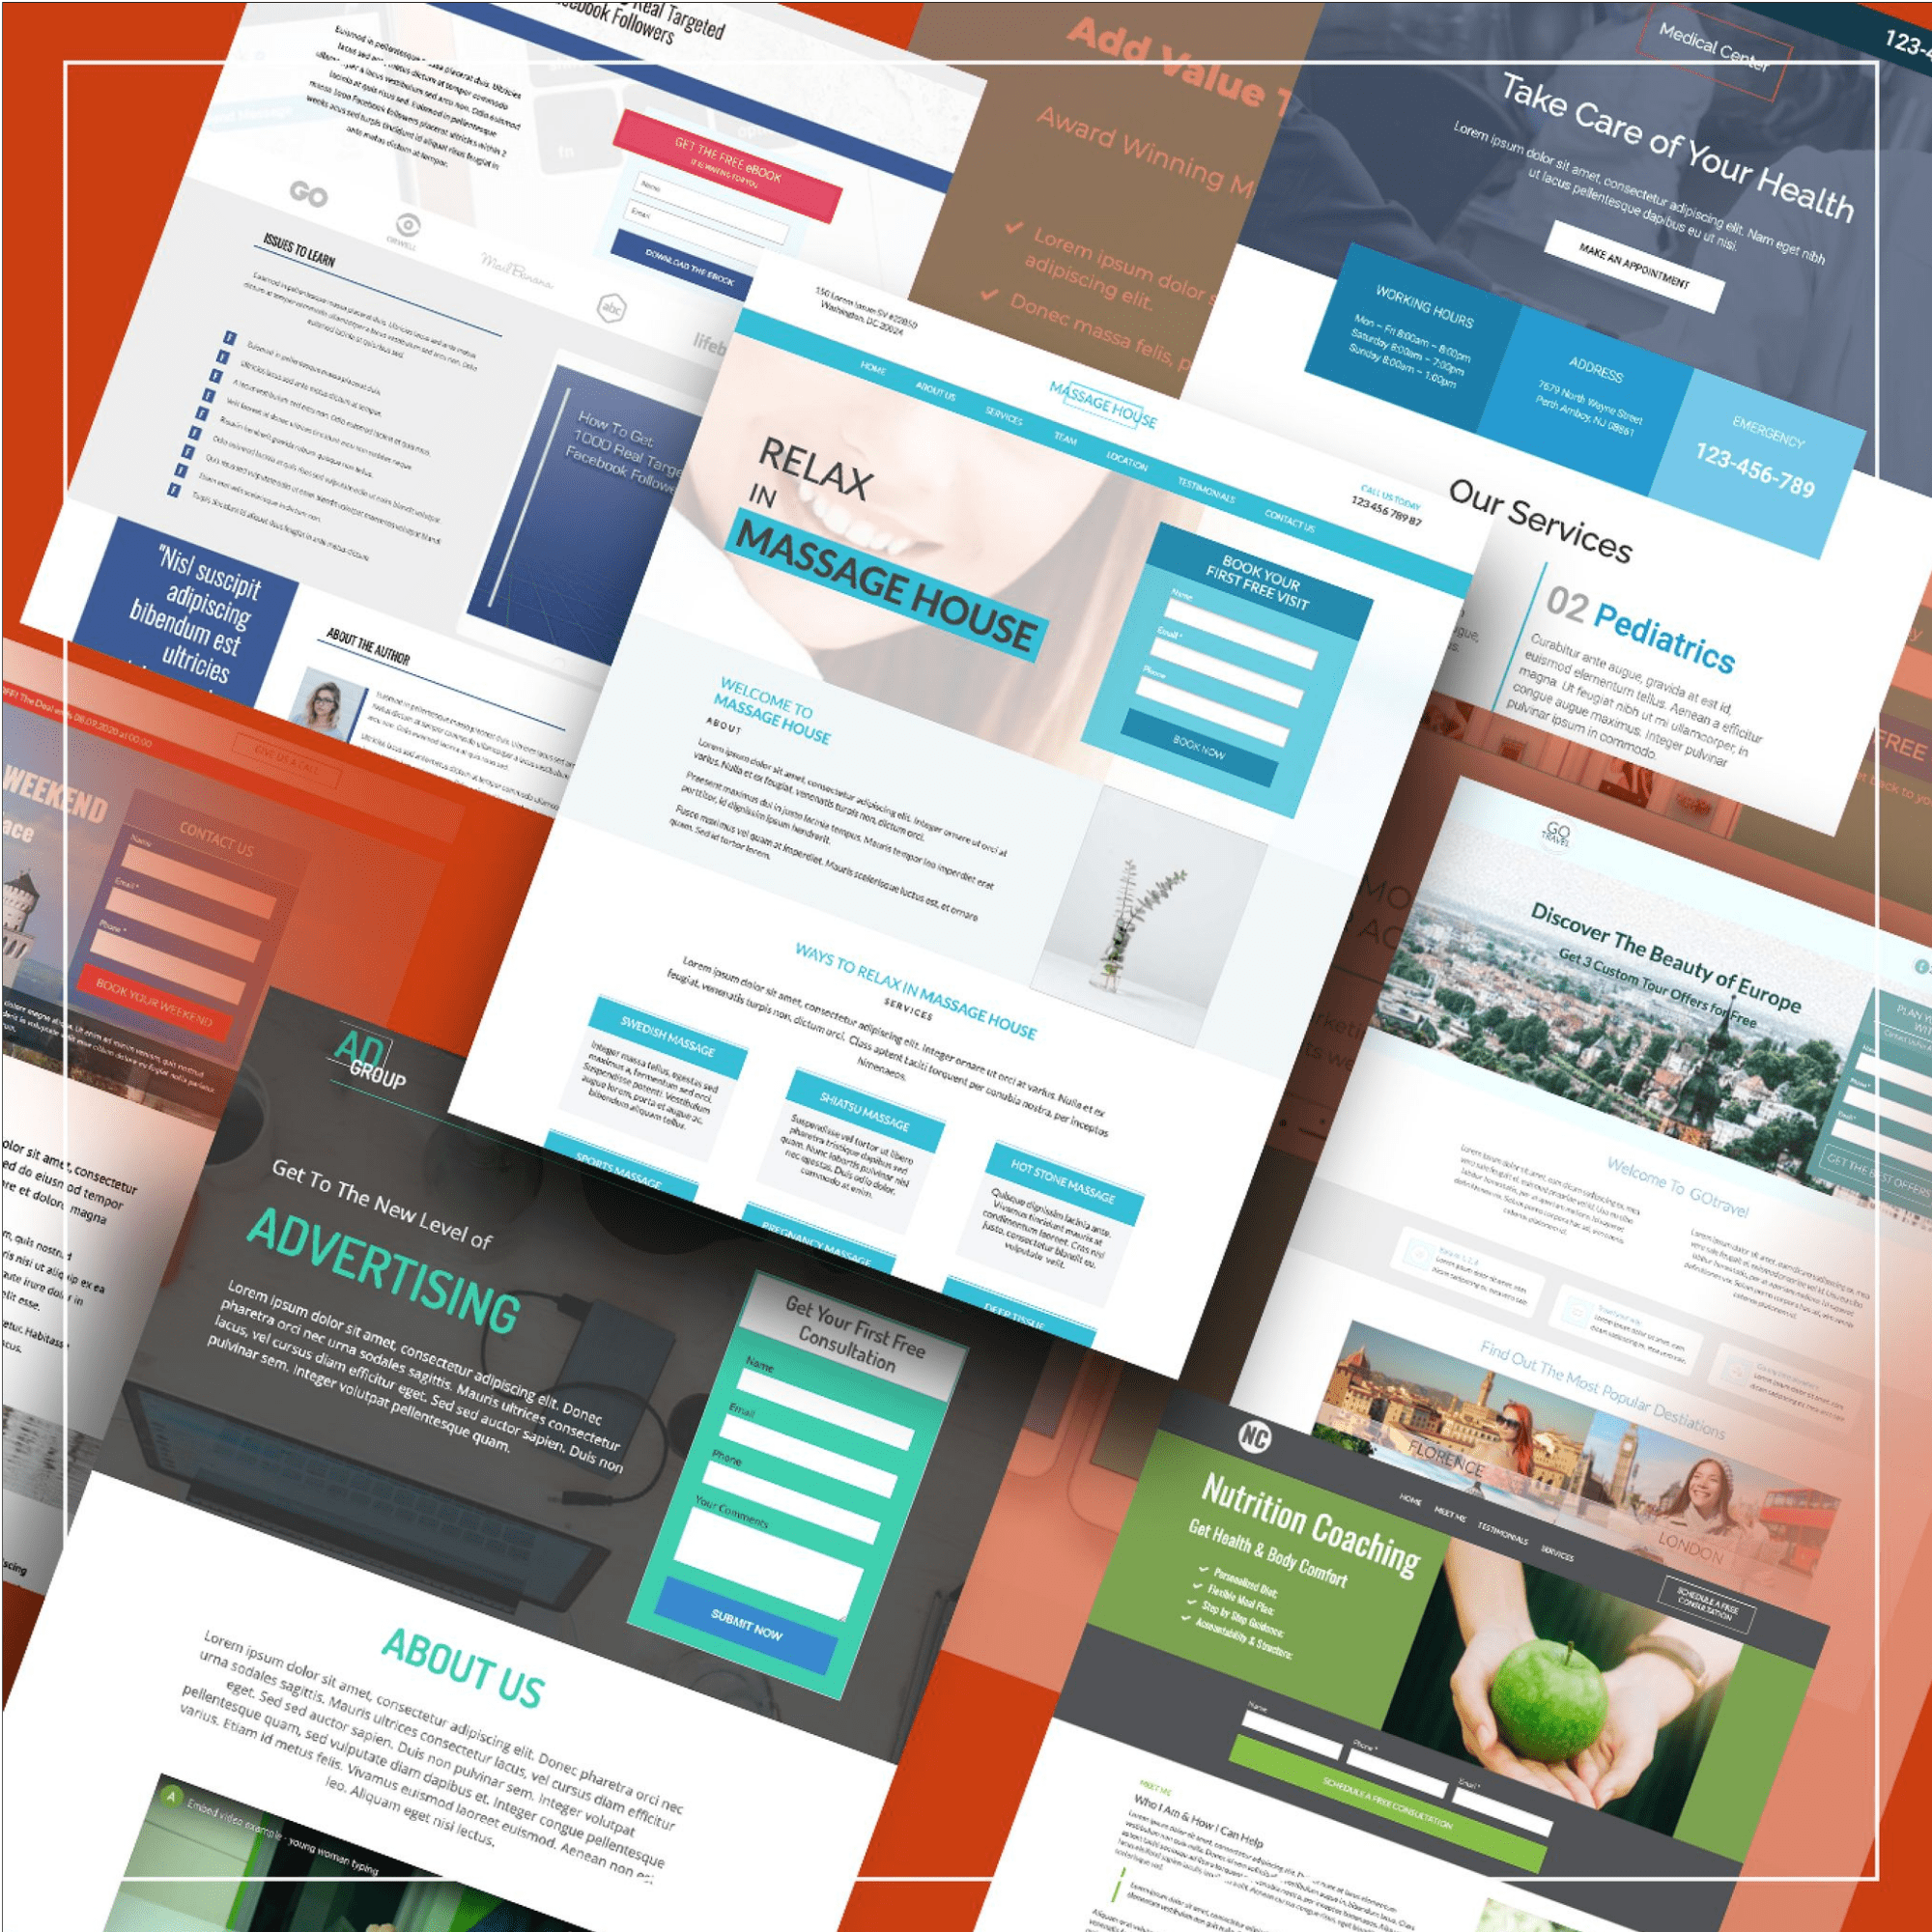 Examples of Multiple Unbounce Responsive Templates Are Tiled.